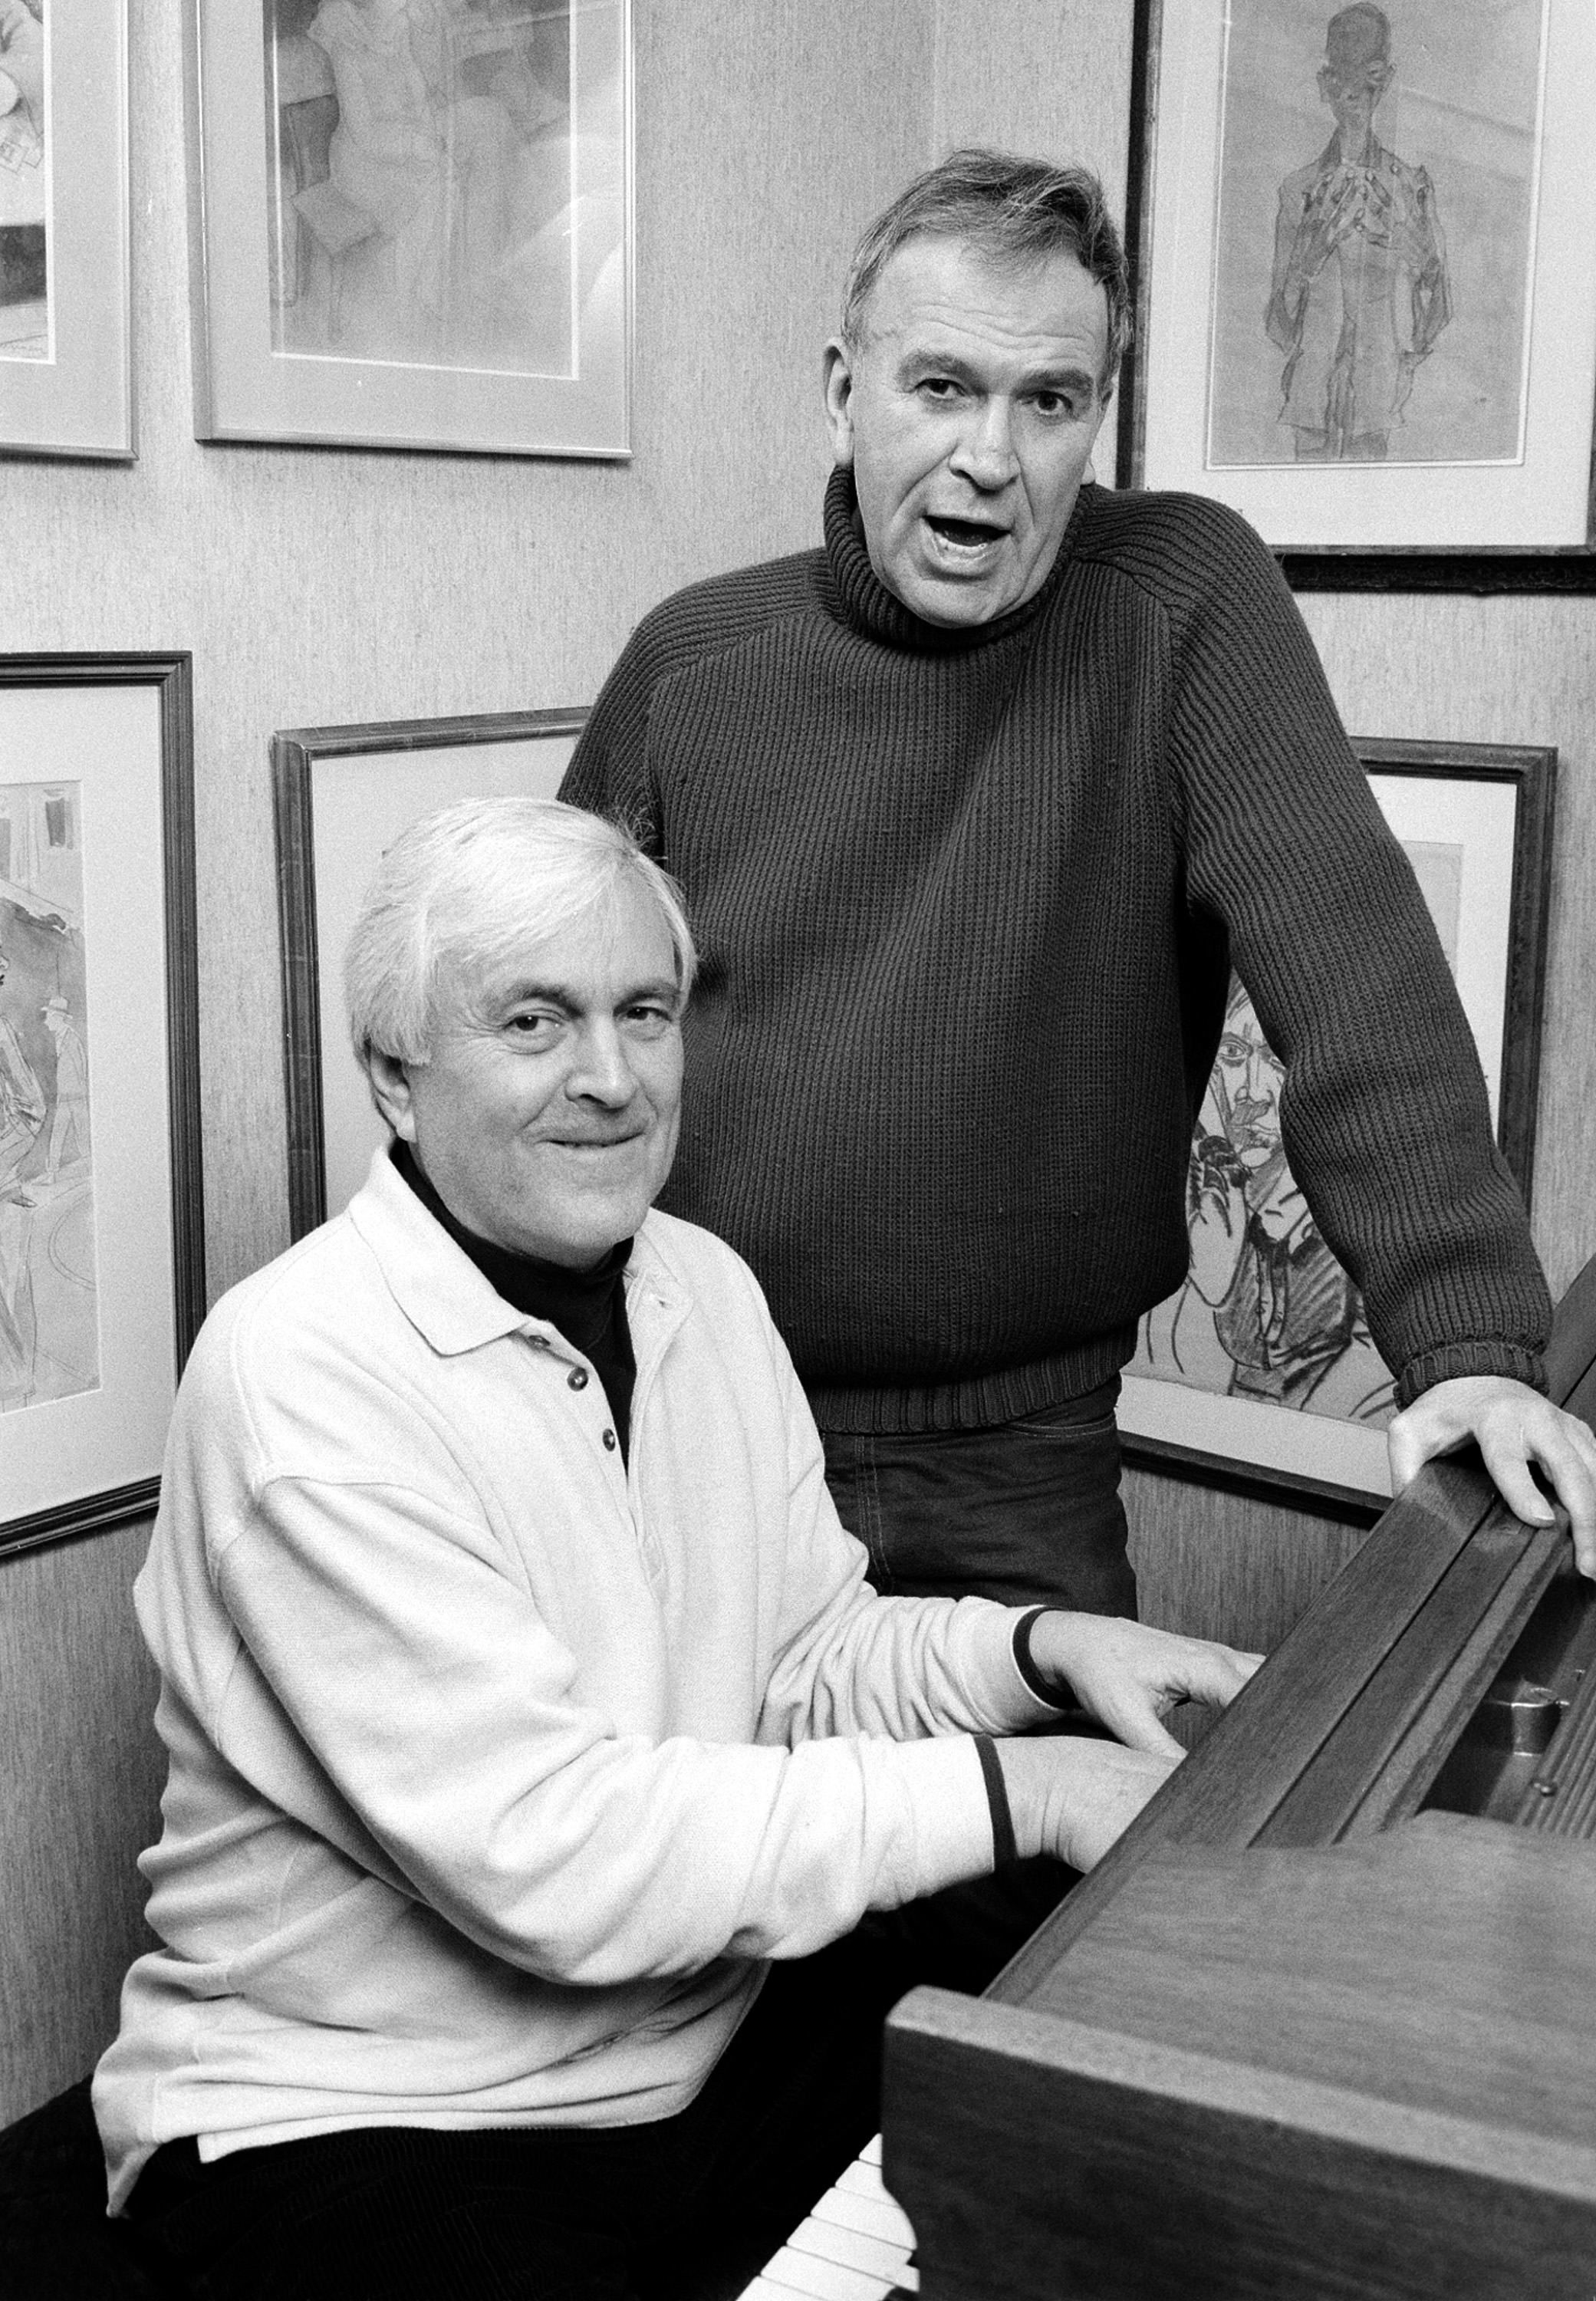 A black and white photo of John Kander and Fred Ebb rehearsing at a piano in Ebb's apartment in 1991.